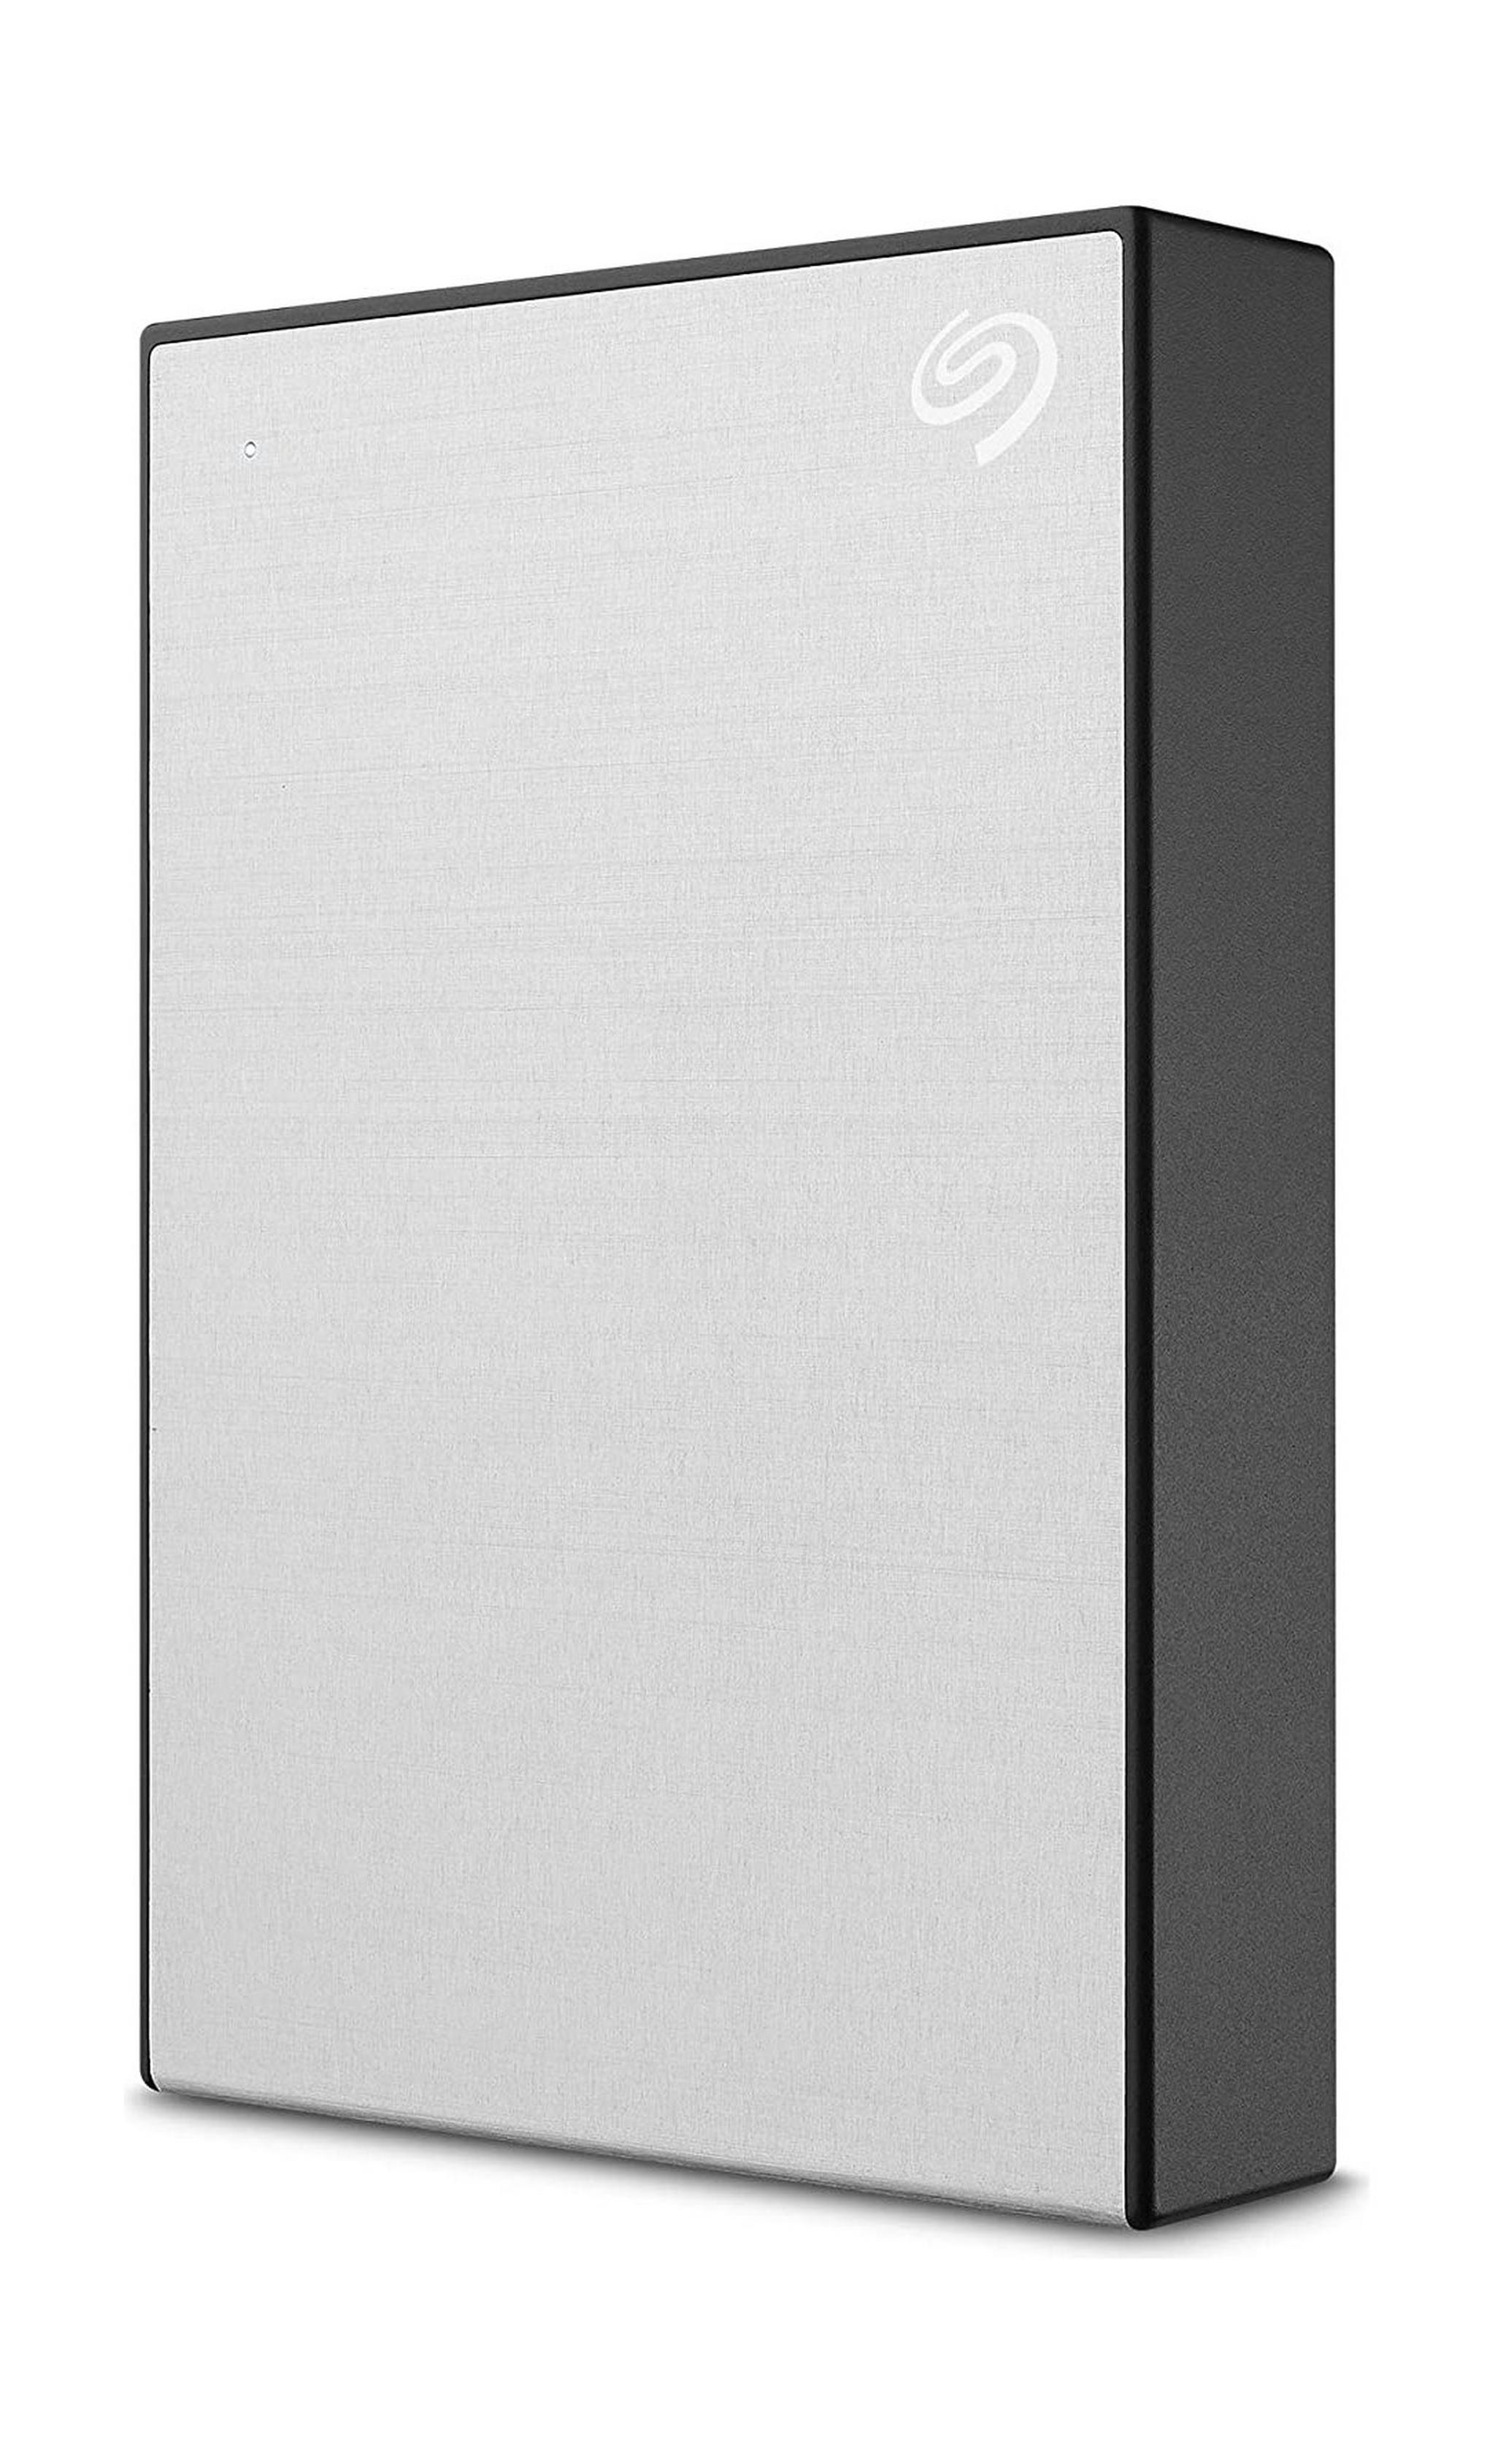 Seagate One Touch 4TB USB 3.2 Gen 1 External Hard Drive - Silver